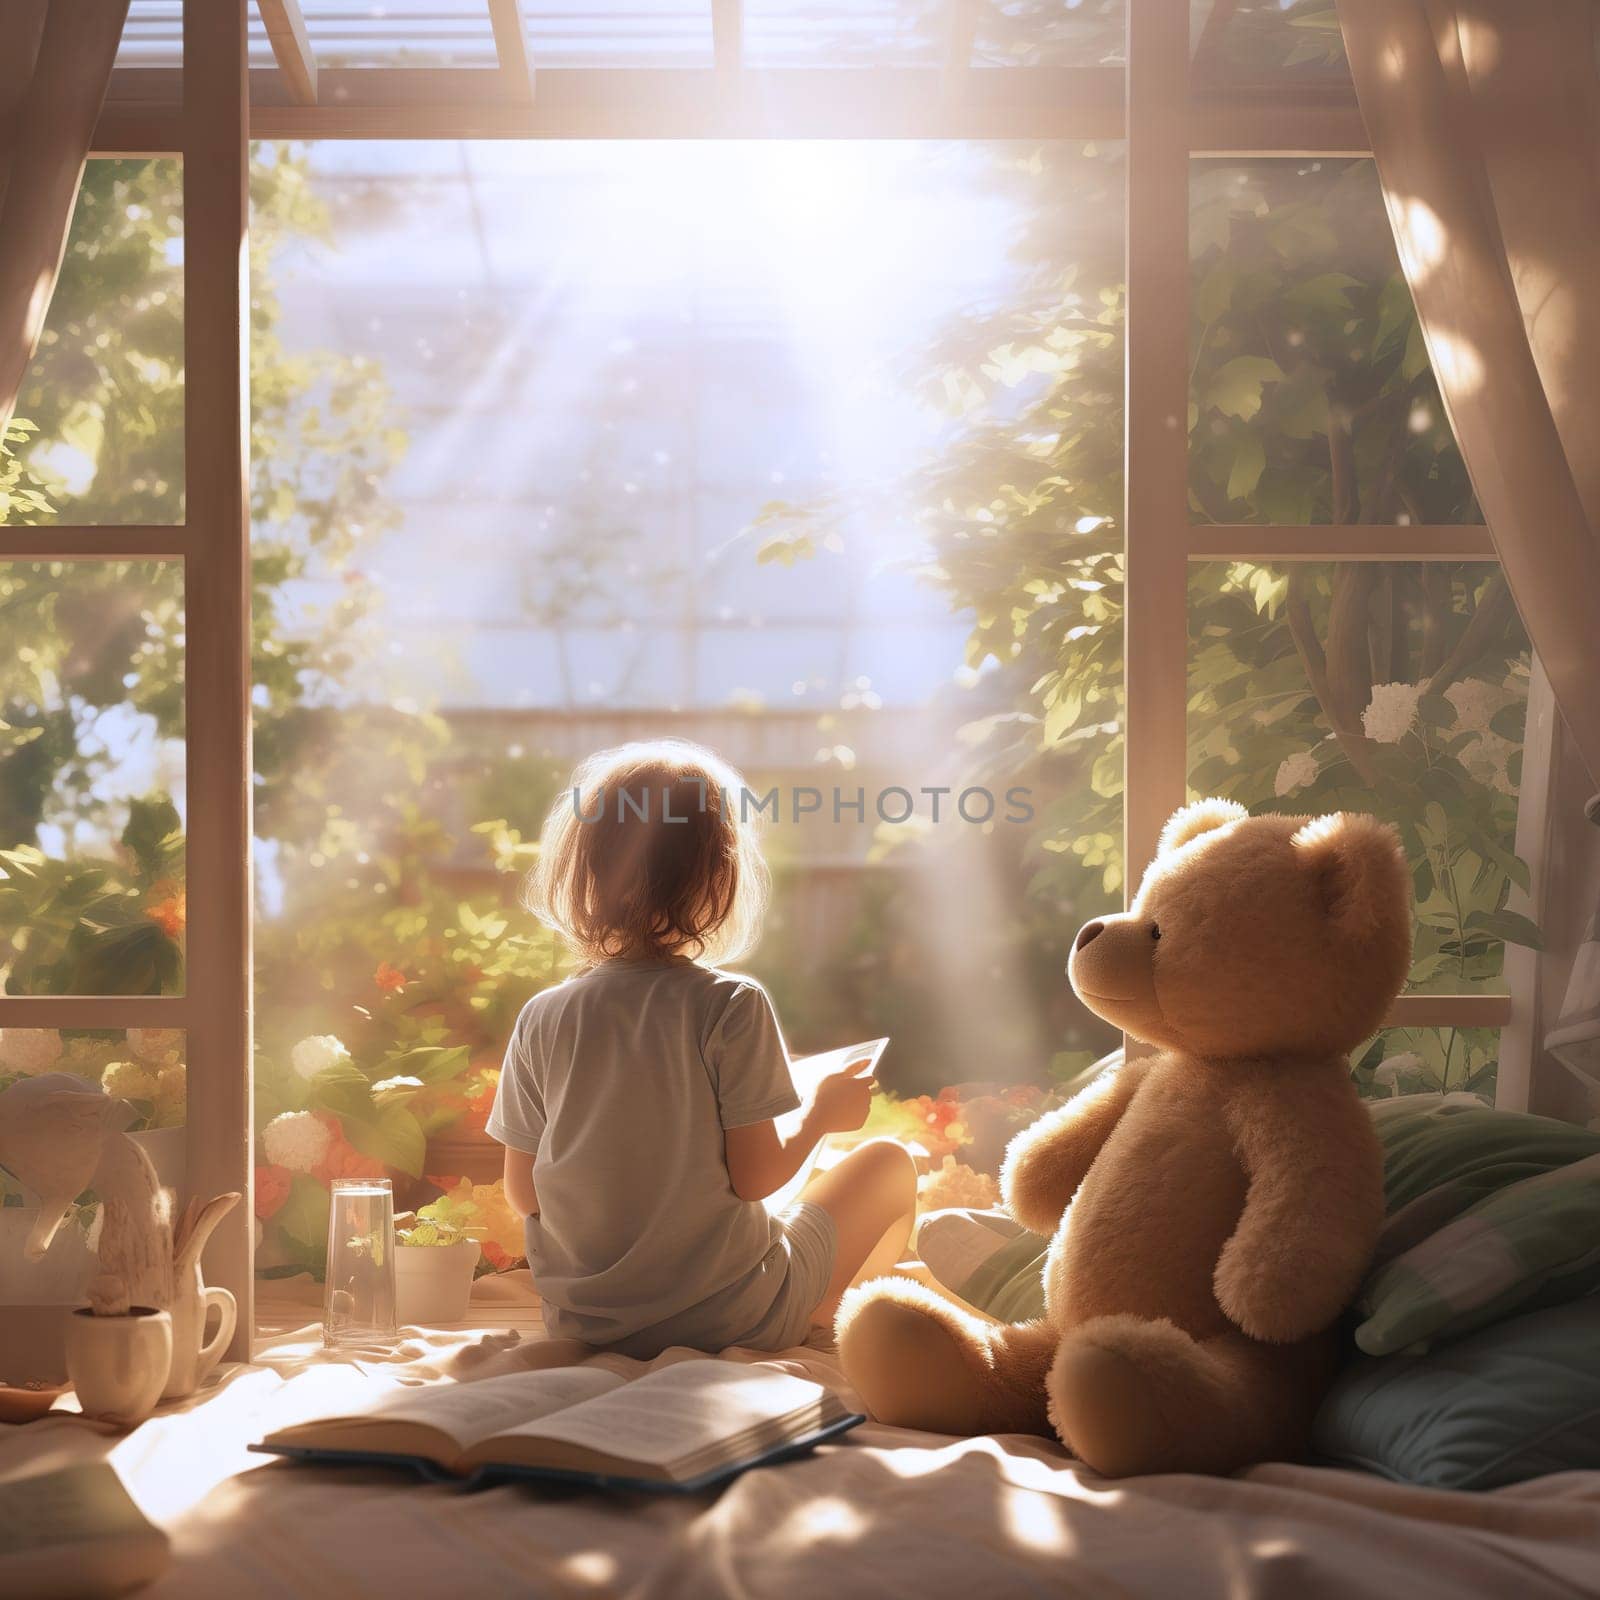 cute little boy is reading a book, sitting on the floor by an open large window, next to a teddy bear with an open book in front of him. by Proxima13